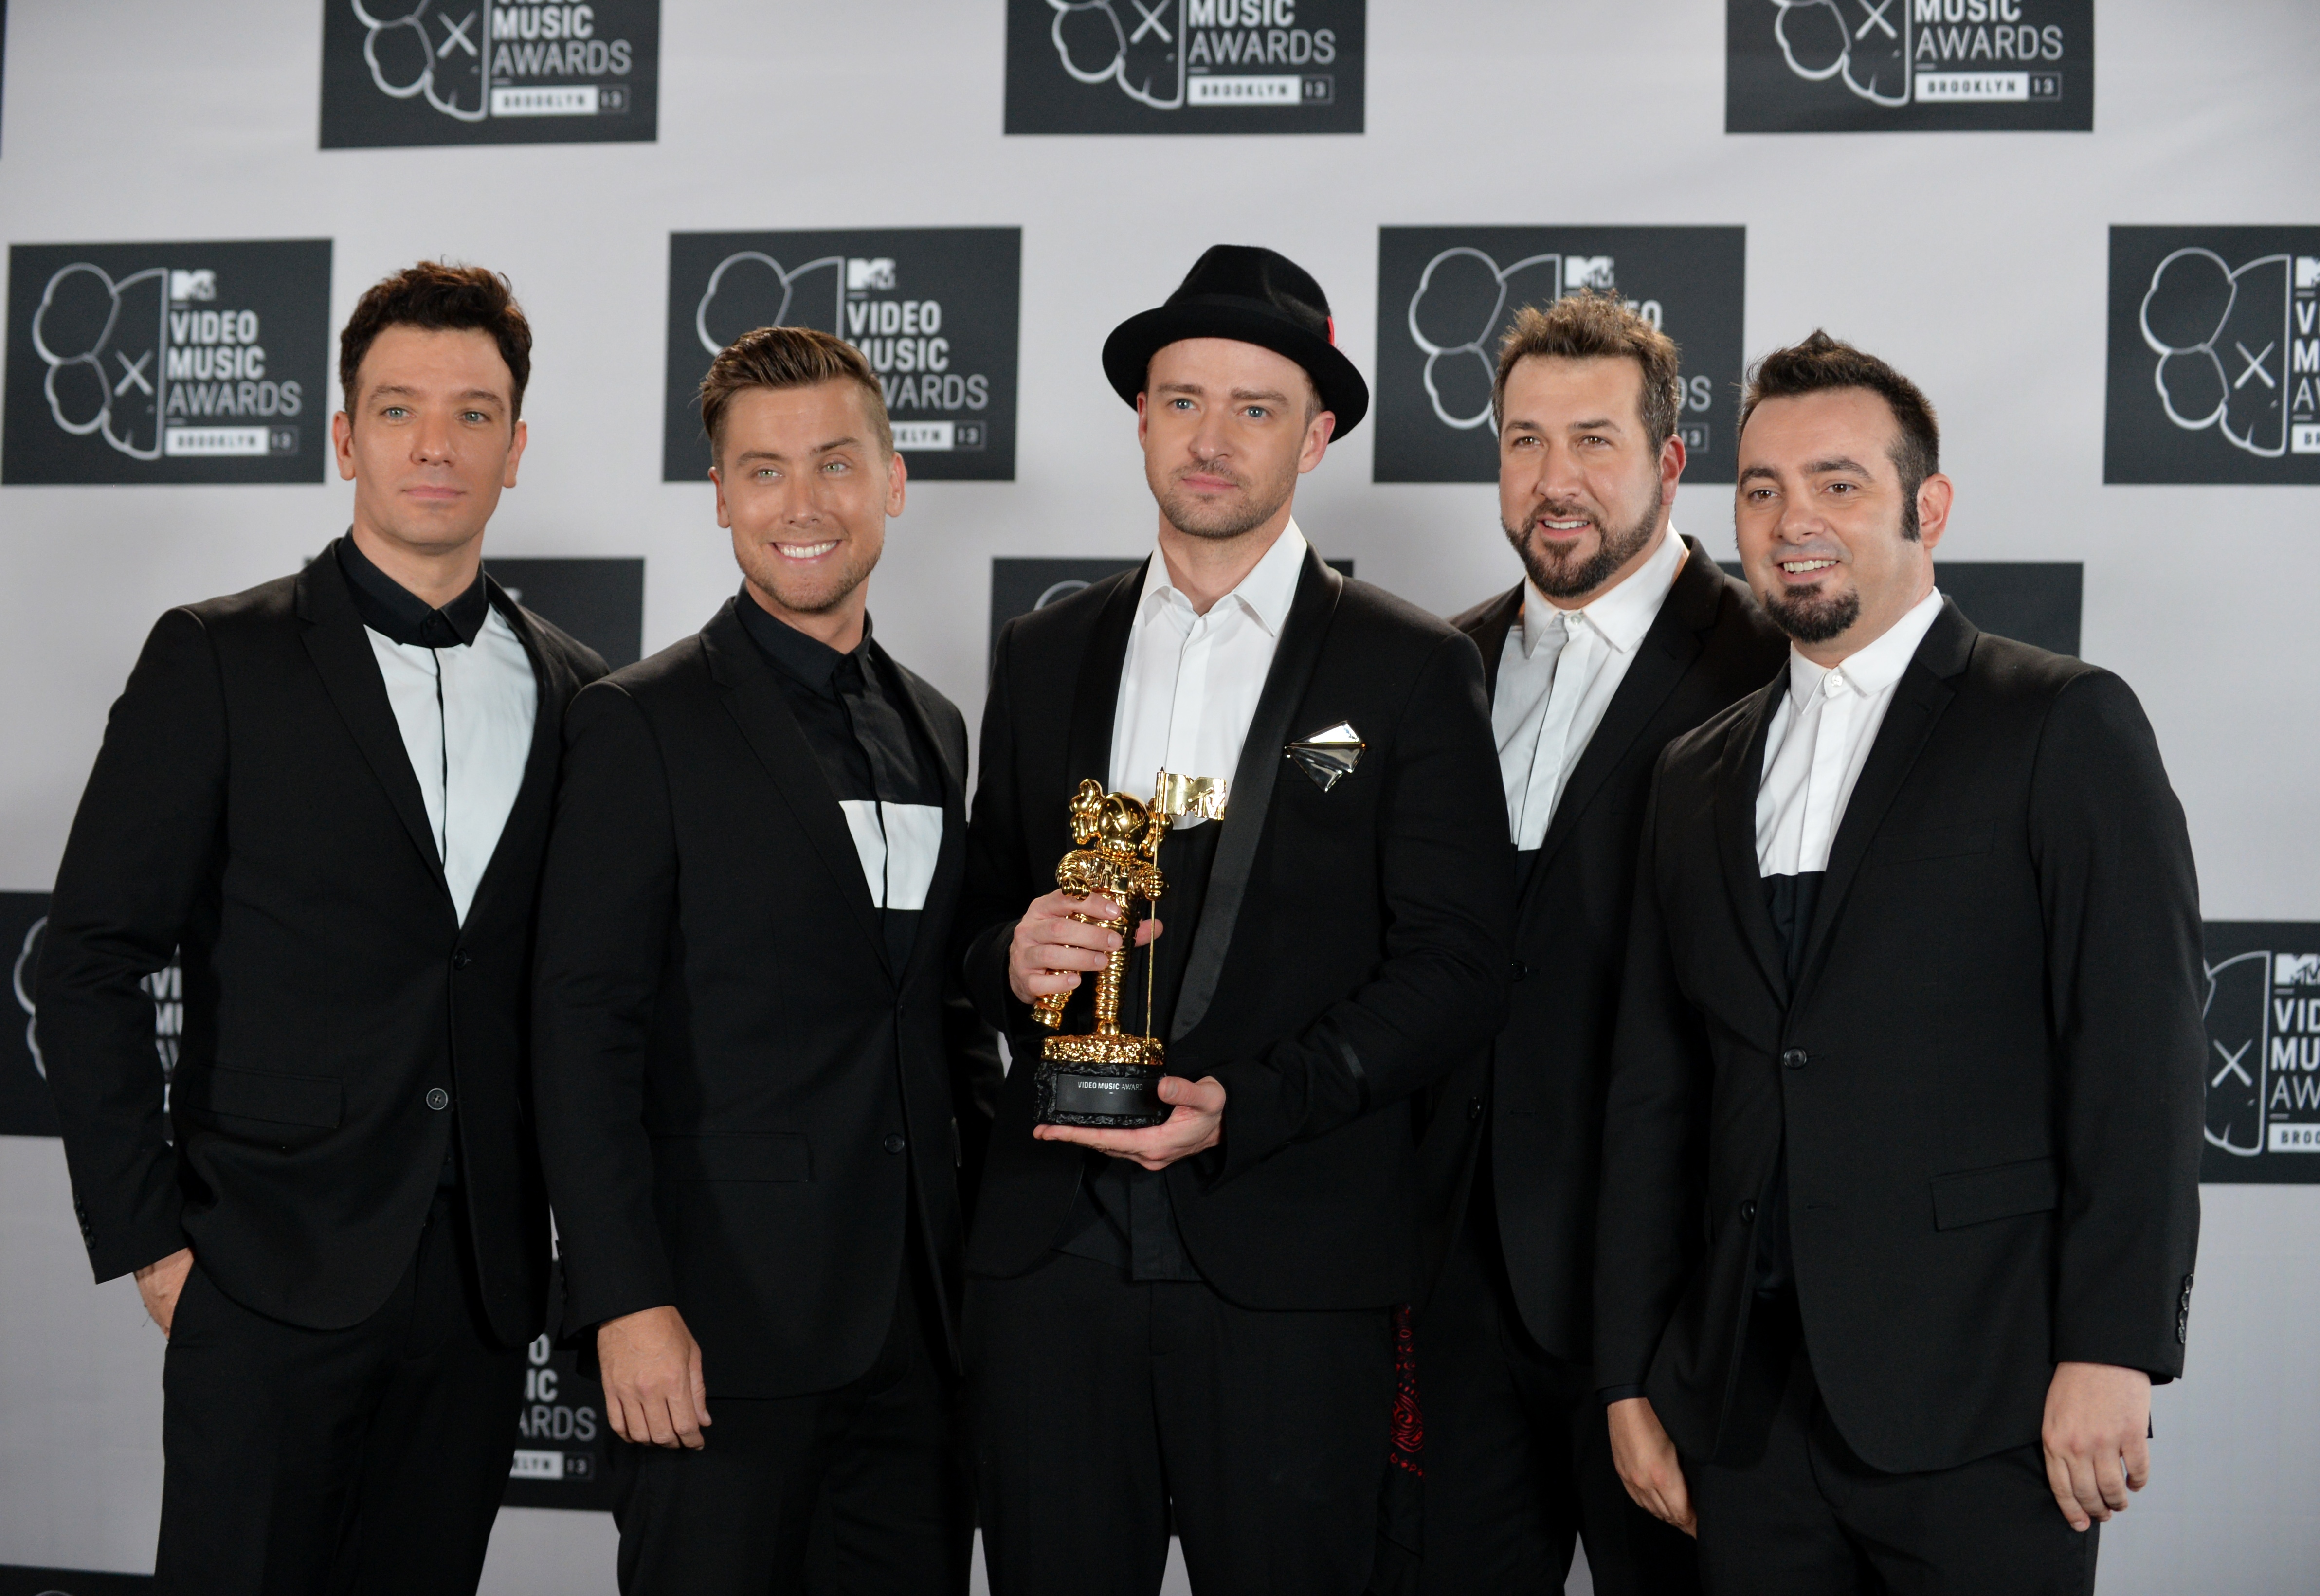 A reunited 'N Sync including Justin Timberlake (C), JC Chasez (L), Lance Bass (2nd L), Joey Fatone (2nd R), and Chris Kirkpatrick (R) at the MTV Video Music Awards August 25, 2013 at the Barclays Center in New York. (Stan Honda&mdash;AFP/Getty Images)